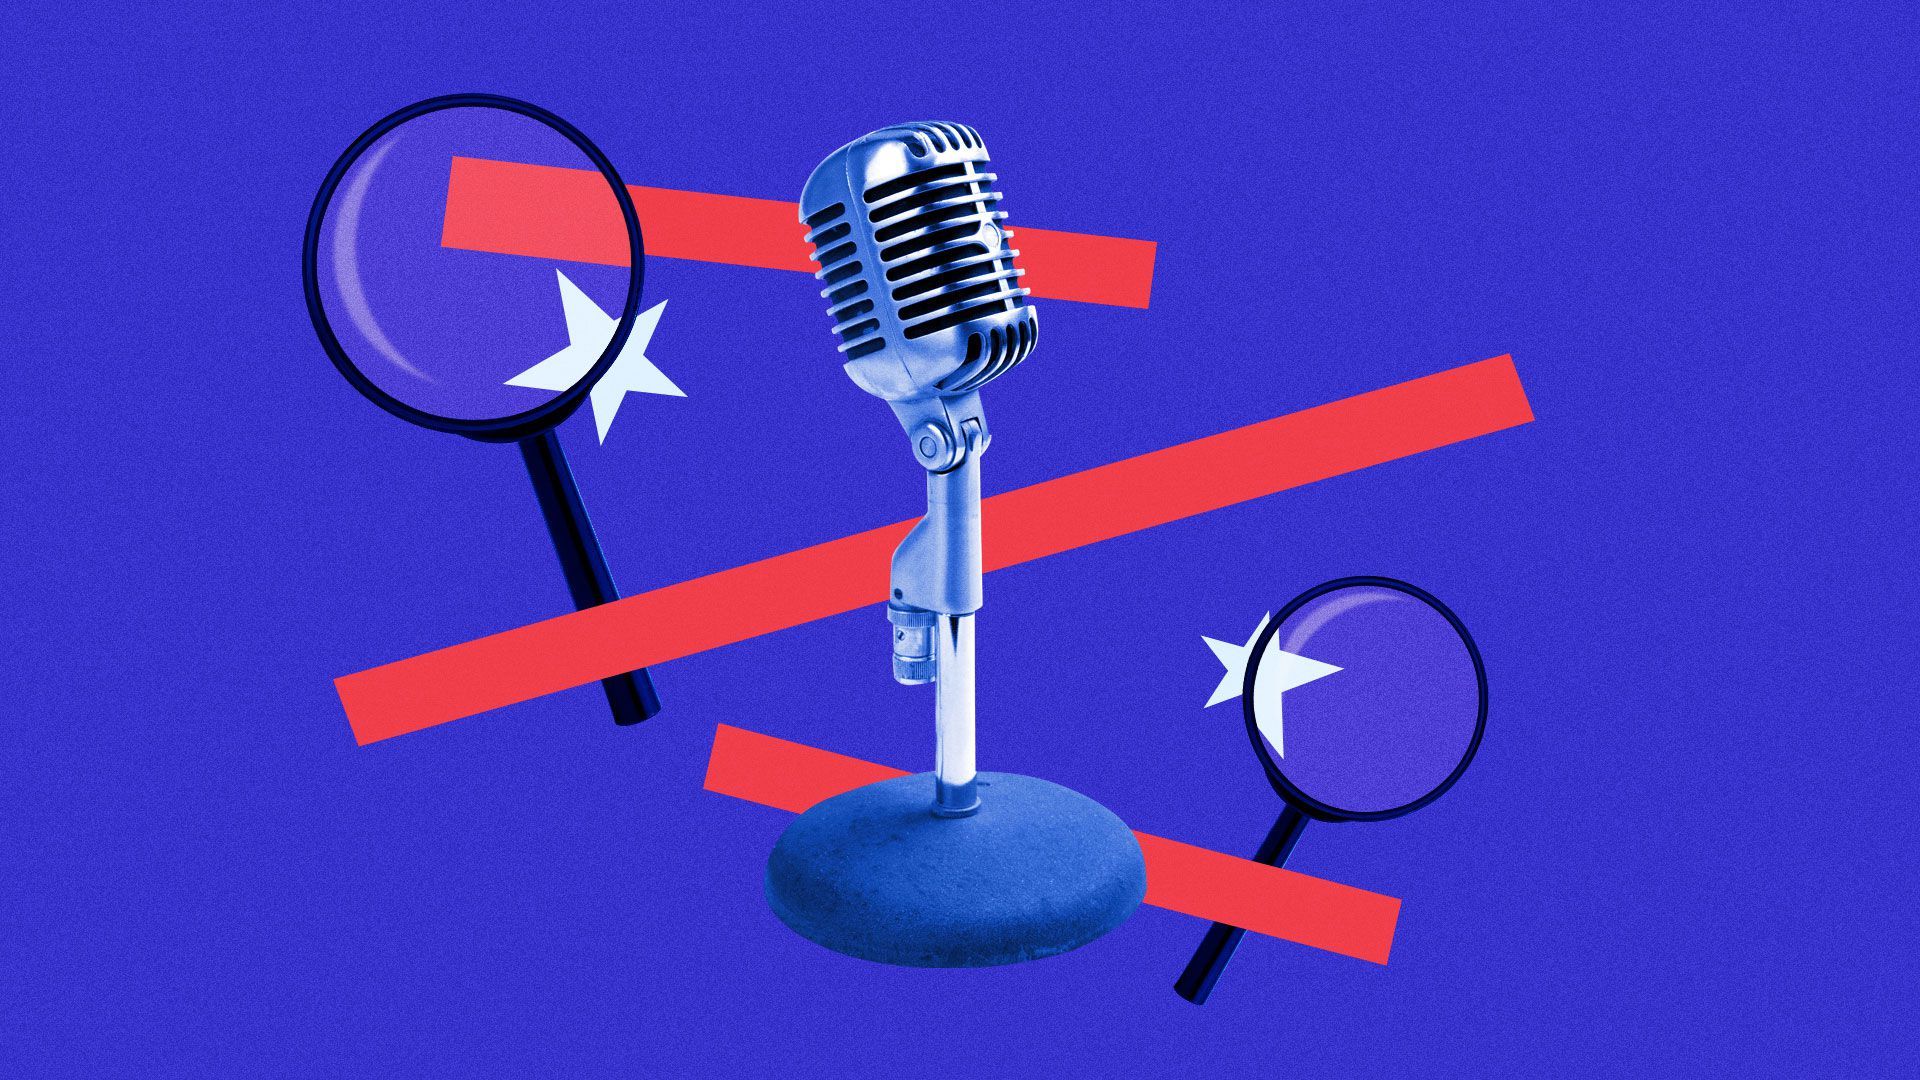 Illustration of collage with microphone, magnifying glasses, stars, and stripes